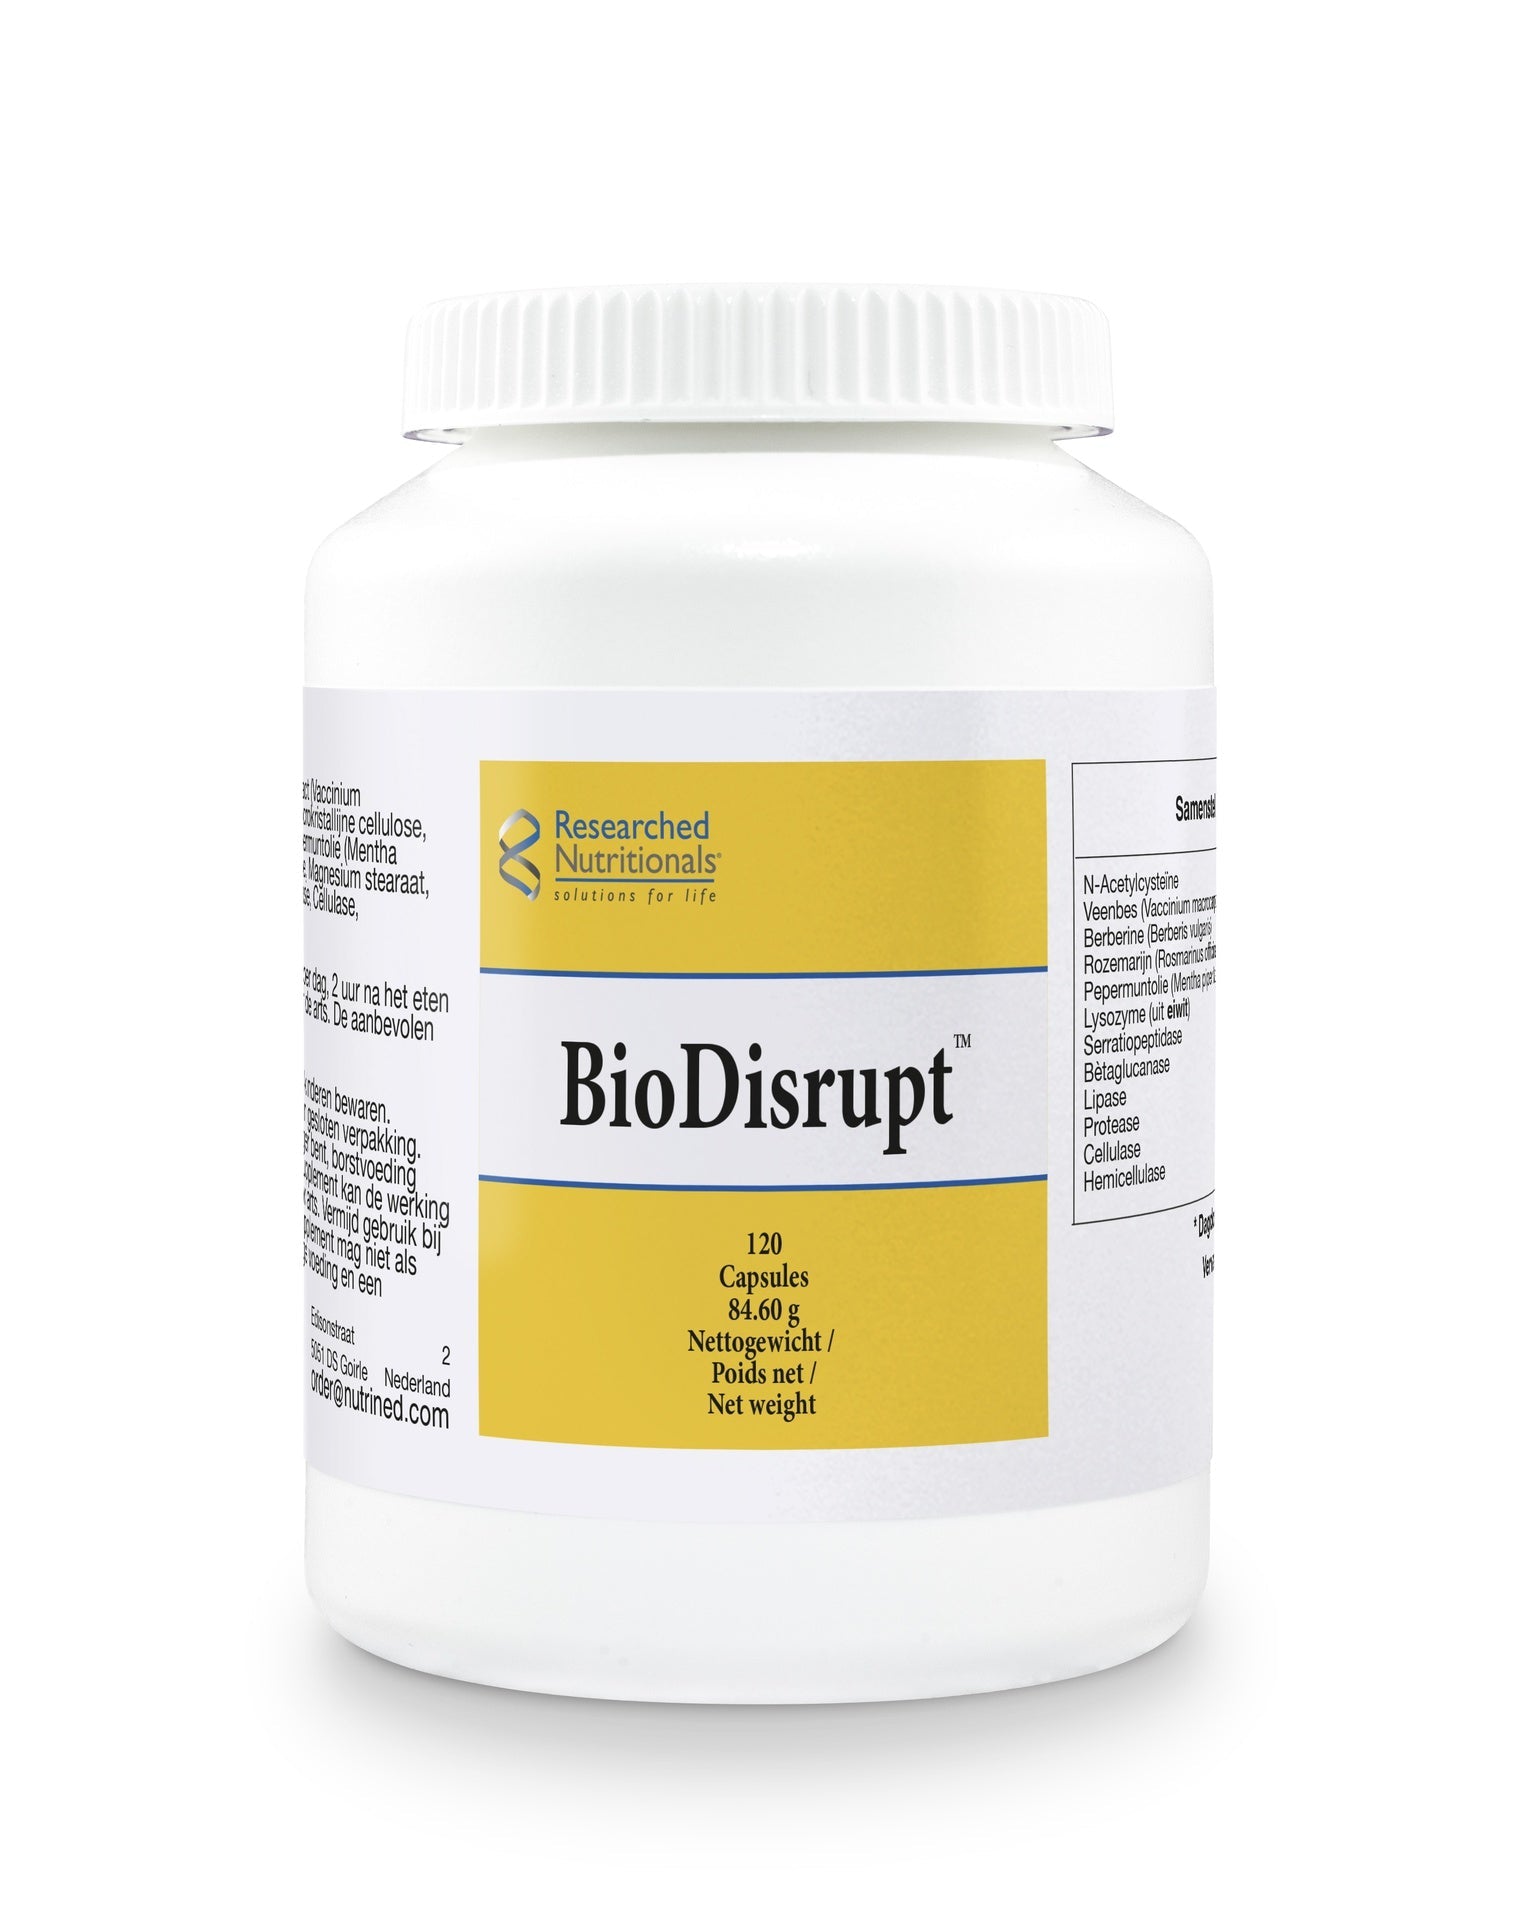 BioDisrupt - 120 Capsules | Researched Nutritionals